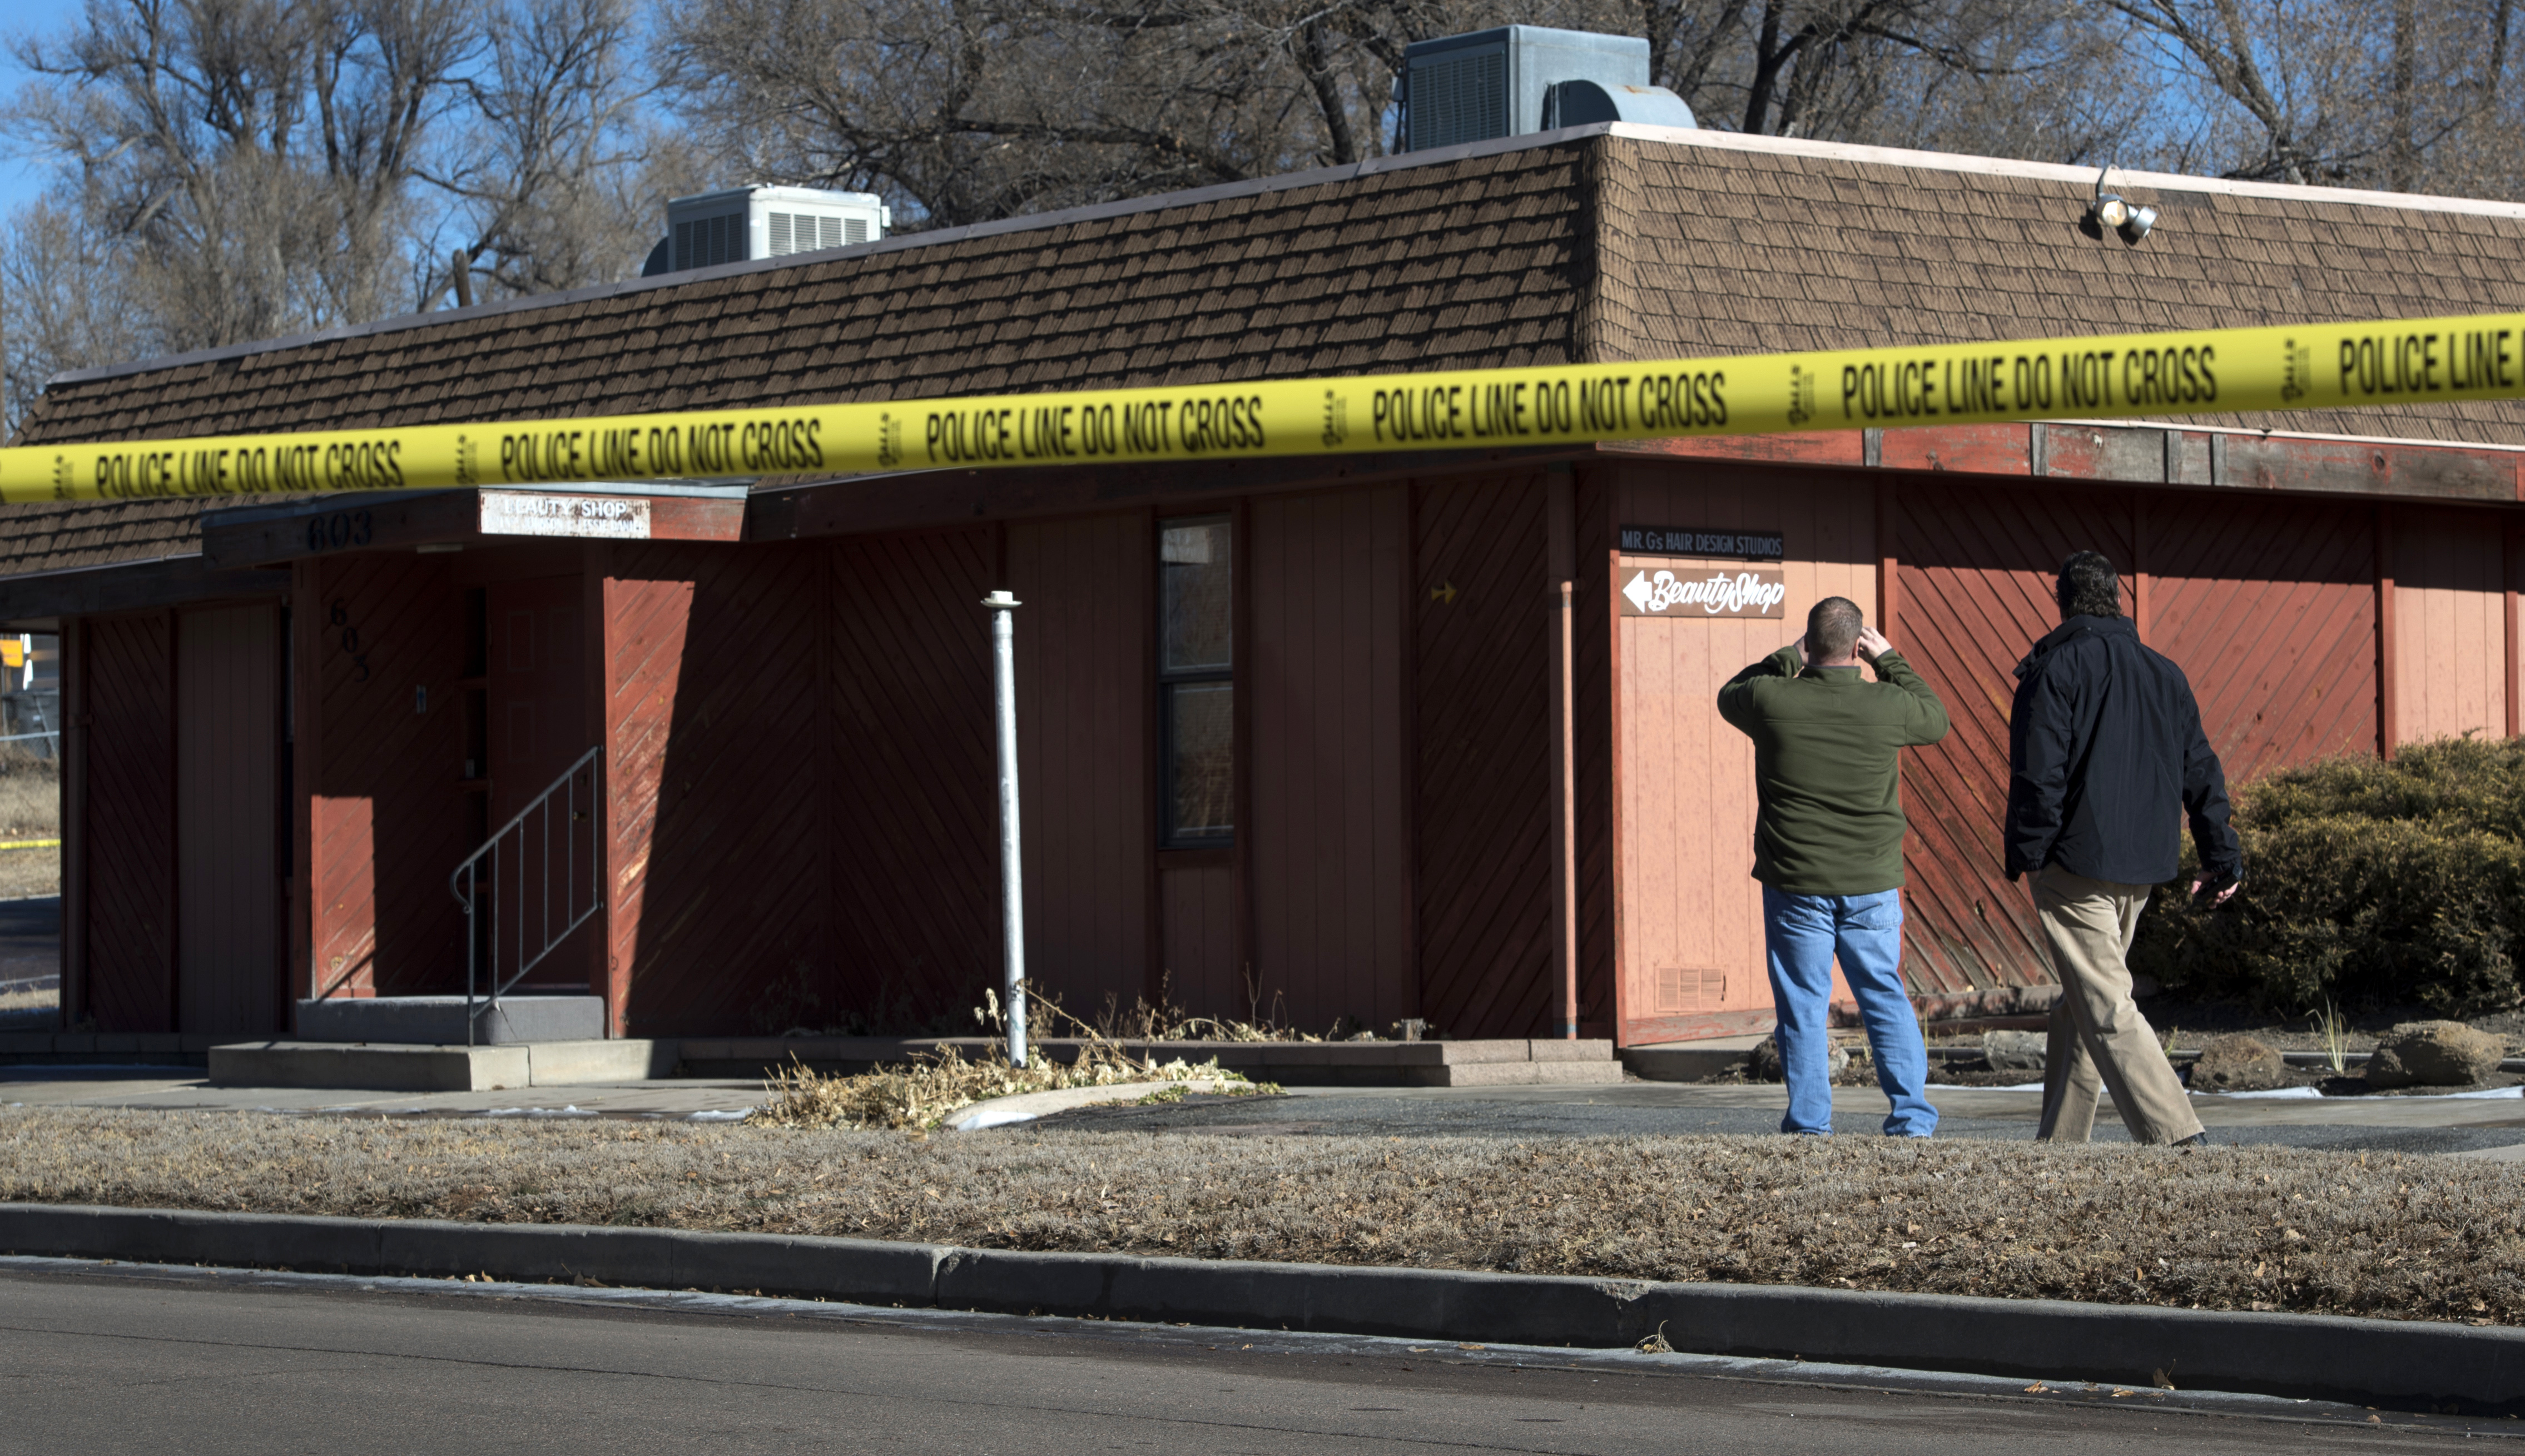 Colorado Springs police officers investigate the scene of an explosion on Jan. 6, 2015, at a building in Colorado Springs, Colo.